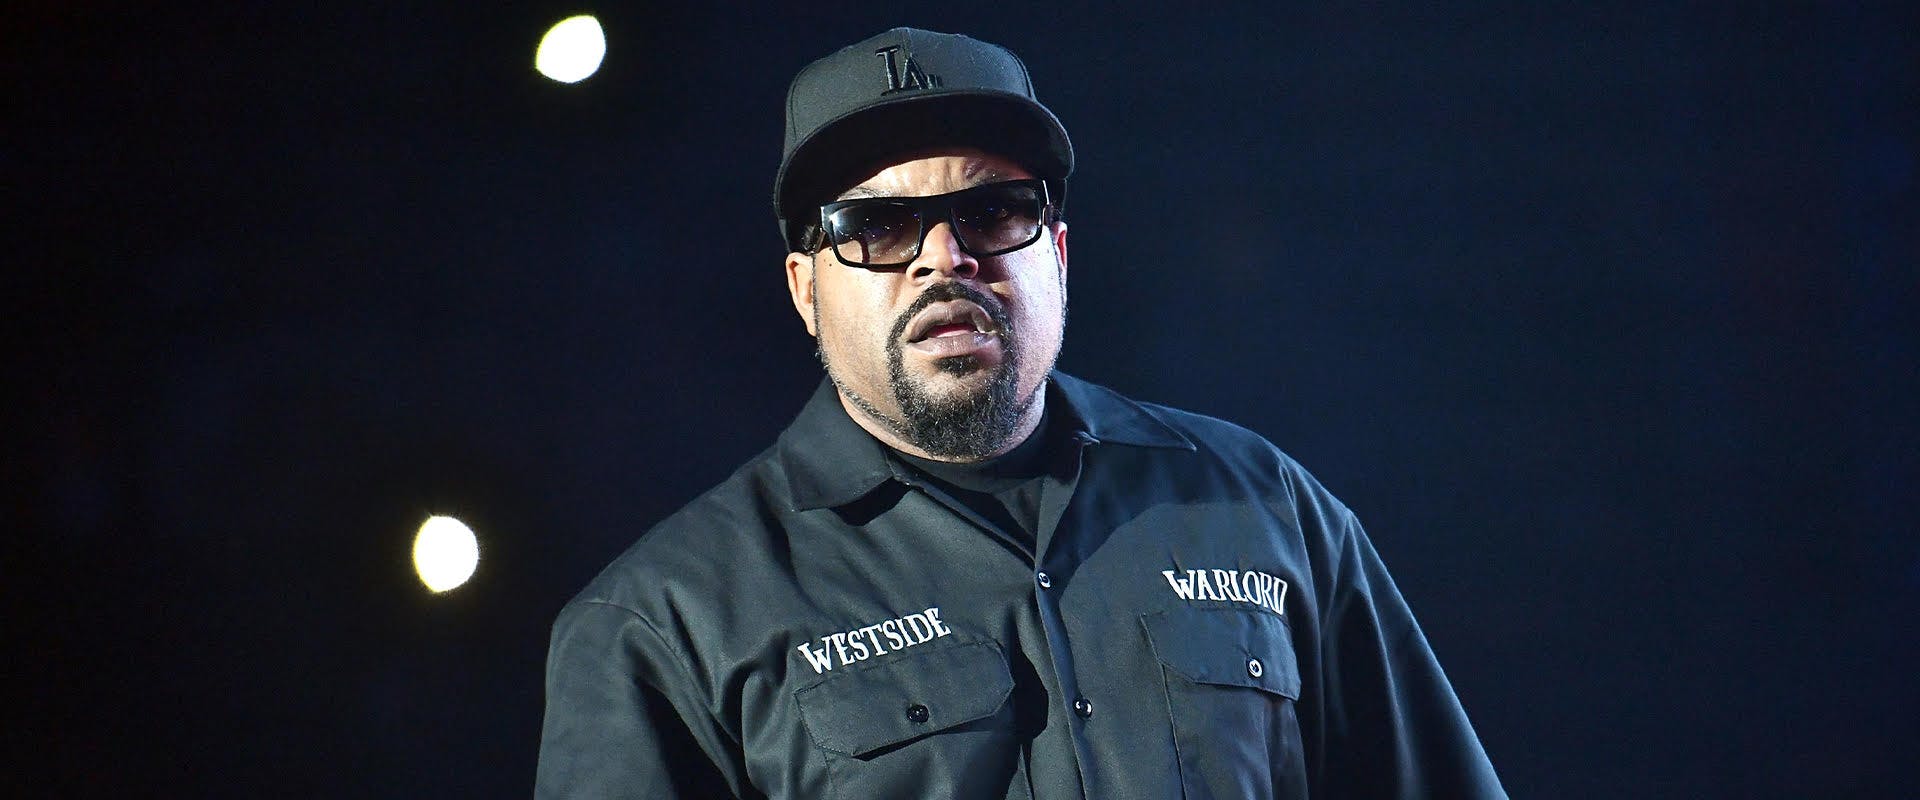  Rapper Ice Cube performs onstage during the KDay 93.5 Krush Groove concert at The Forum on April 21, 2018 in Inglewood, California